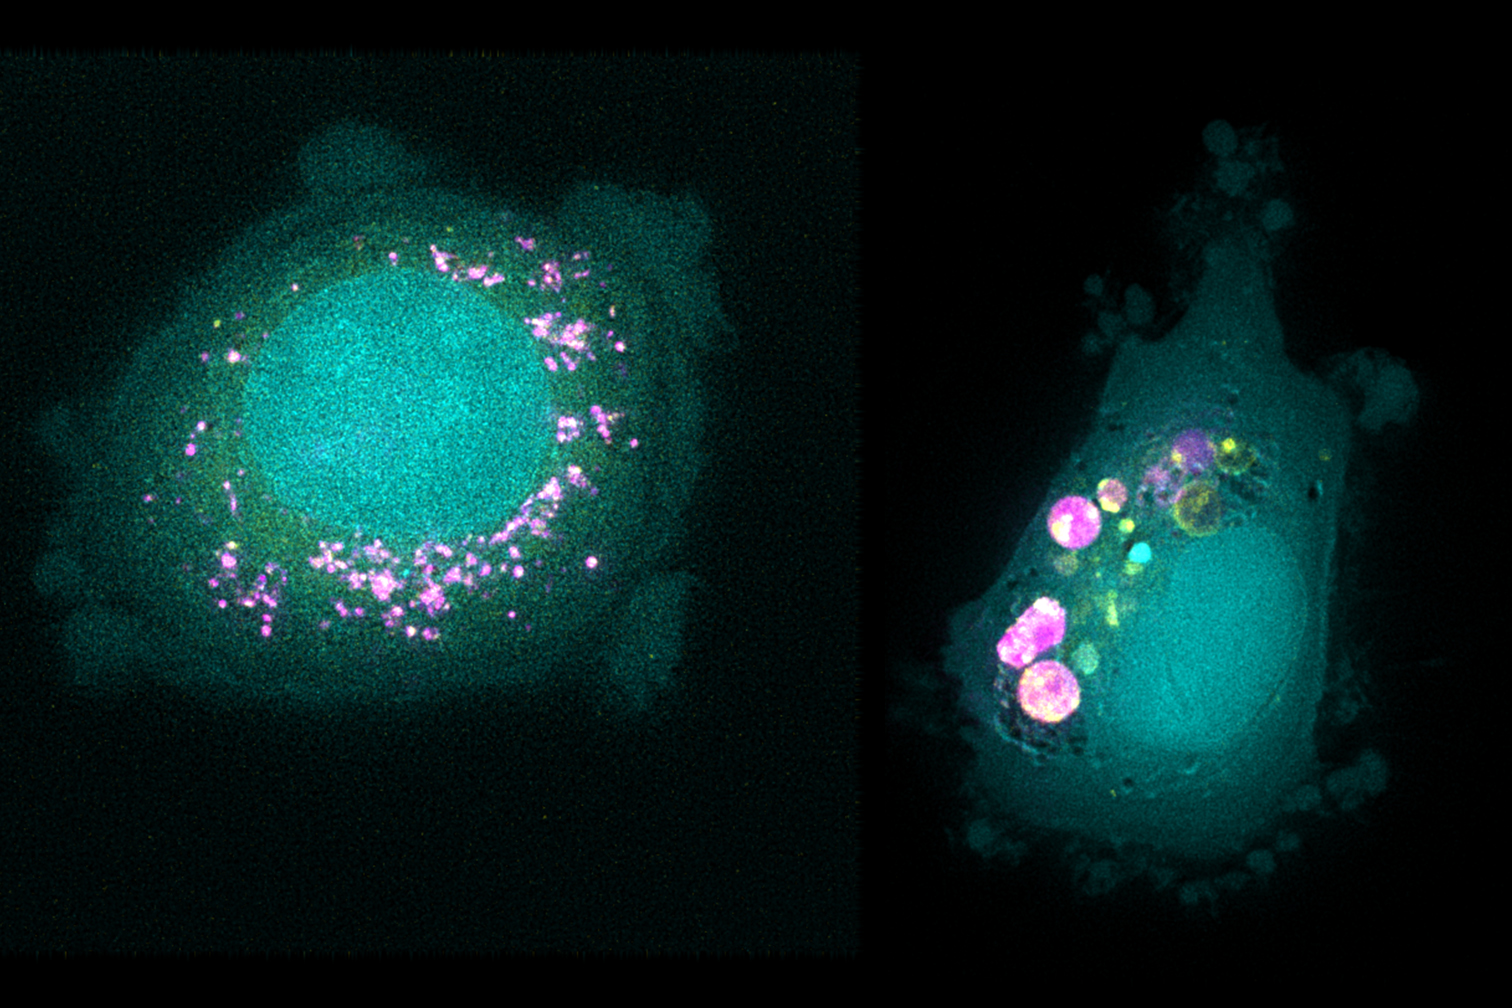 How Different Cancer Cells Respond to Drug-Delivering Nanoparticles